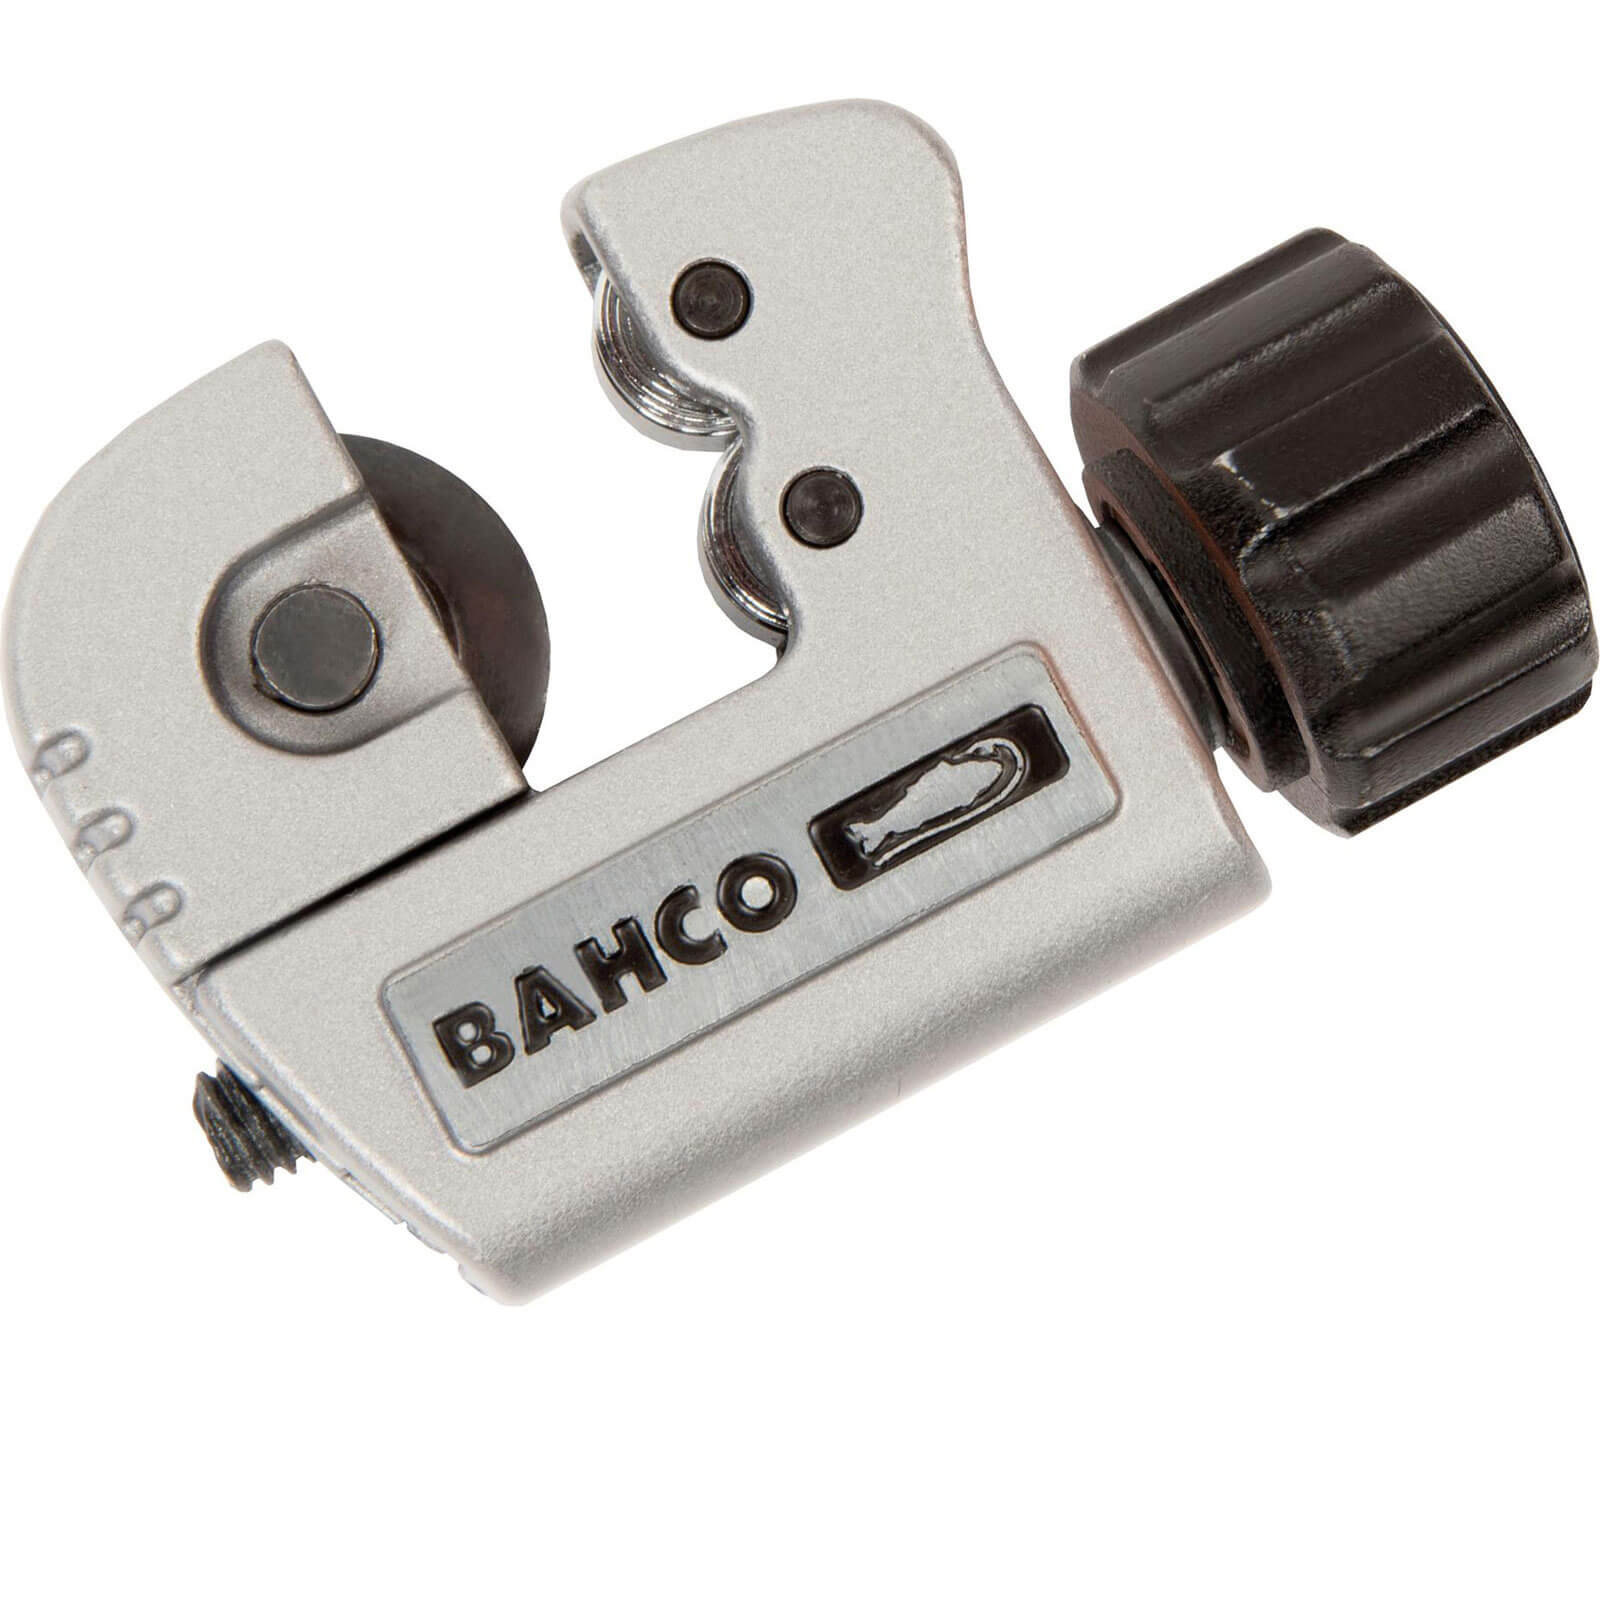 Image of Bahco 401-16 Pipe Cutter 3mm - 16mm